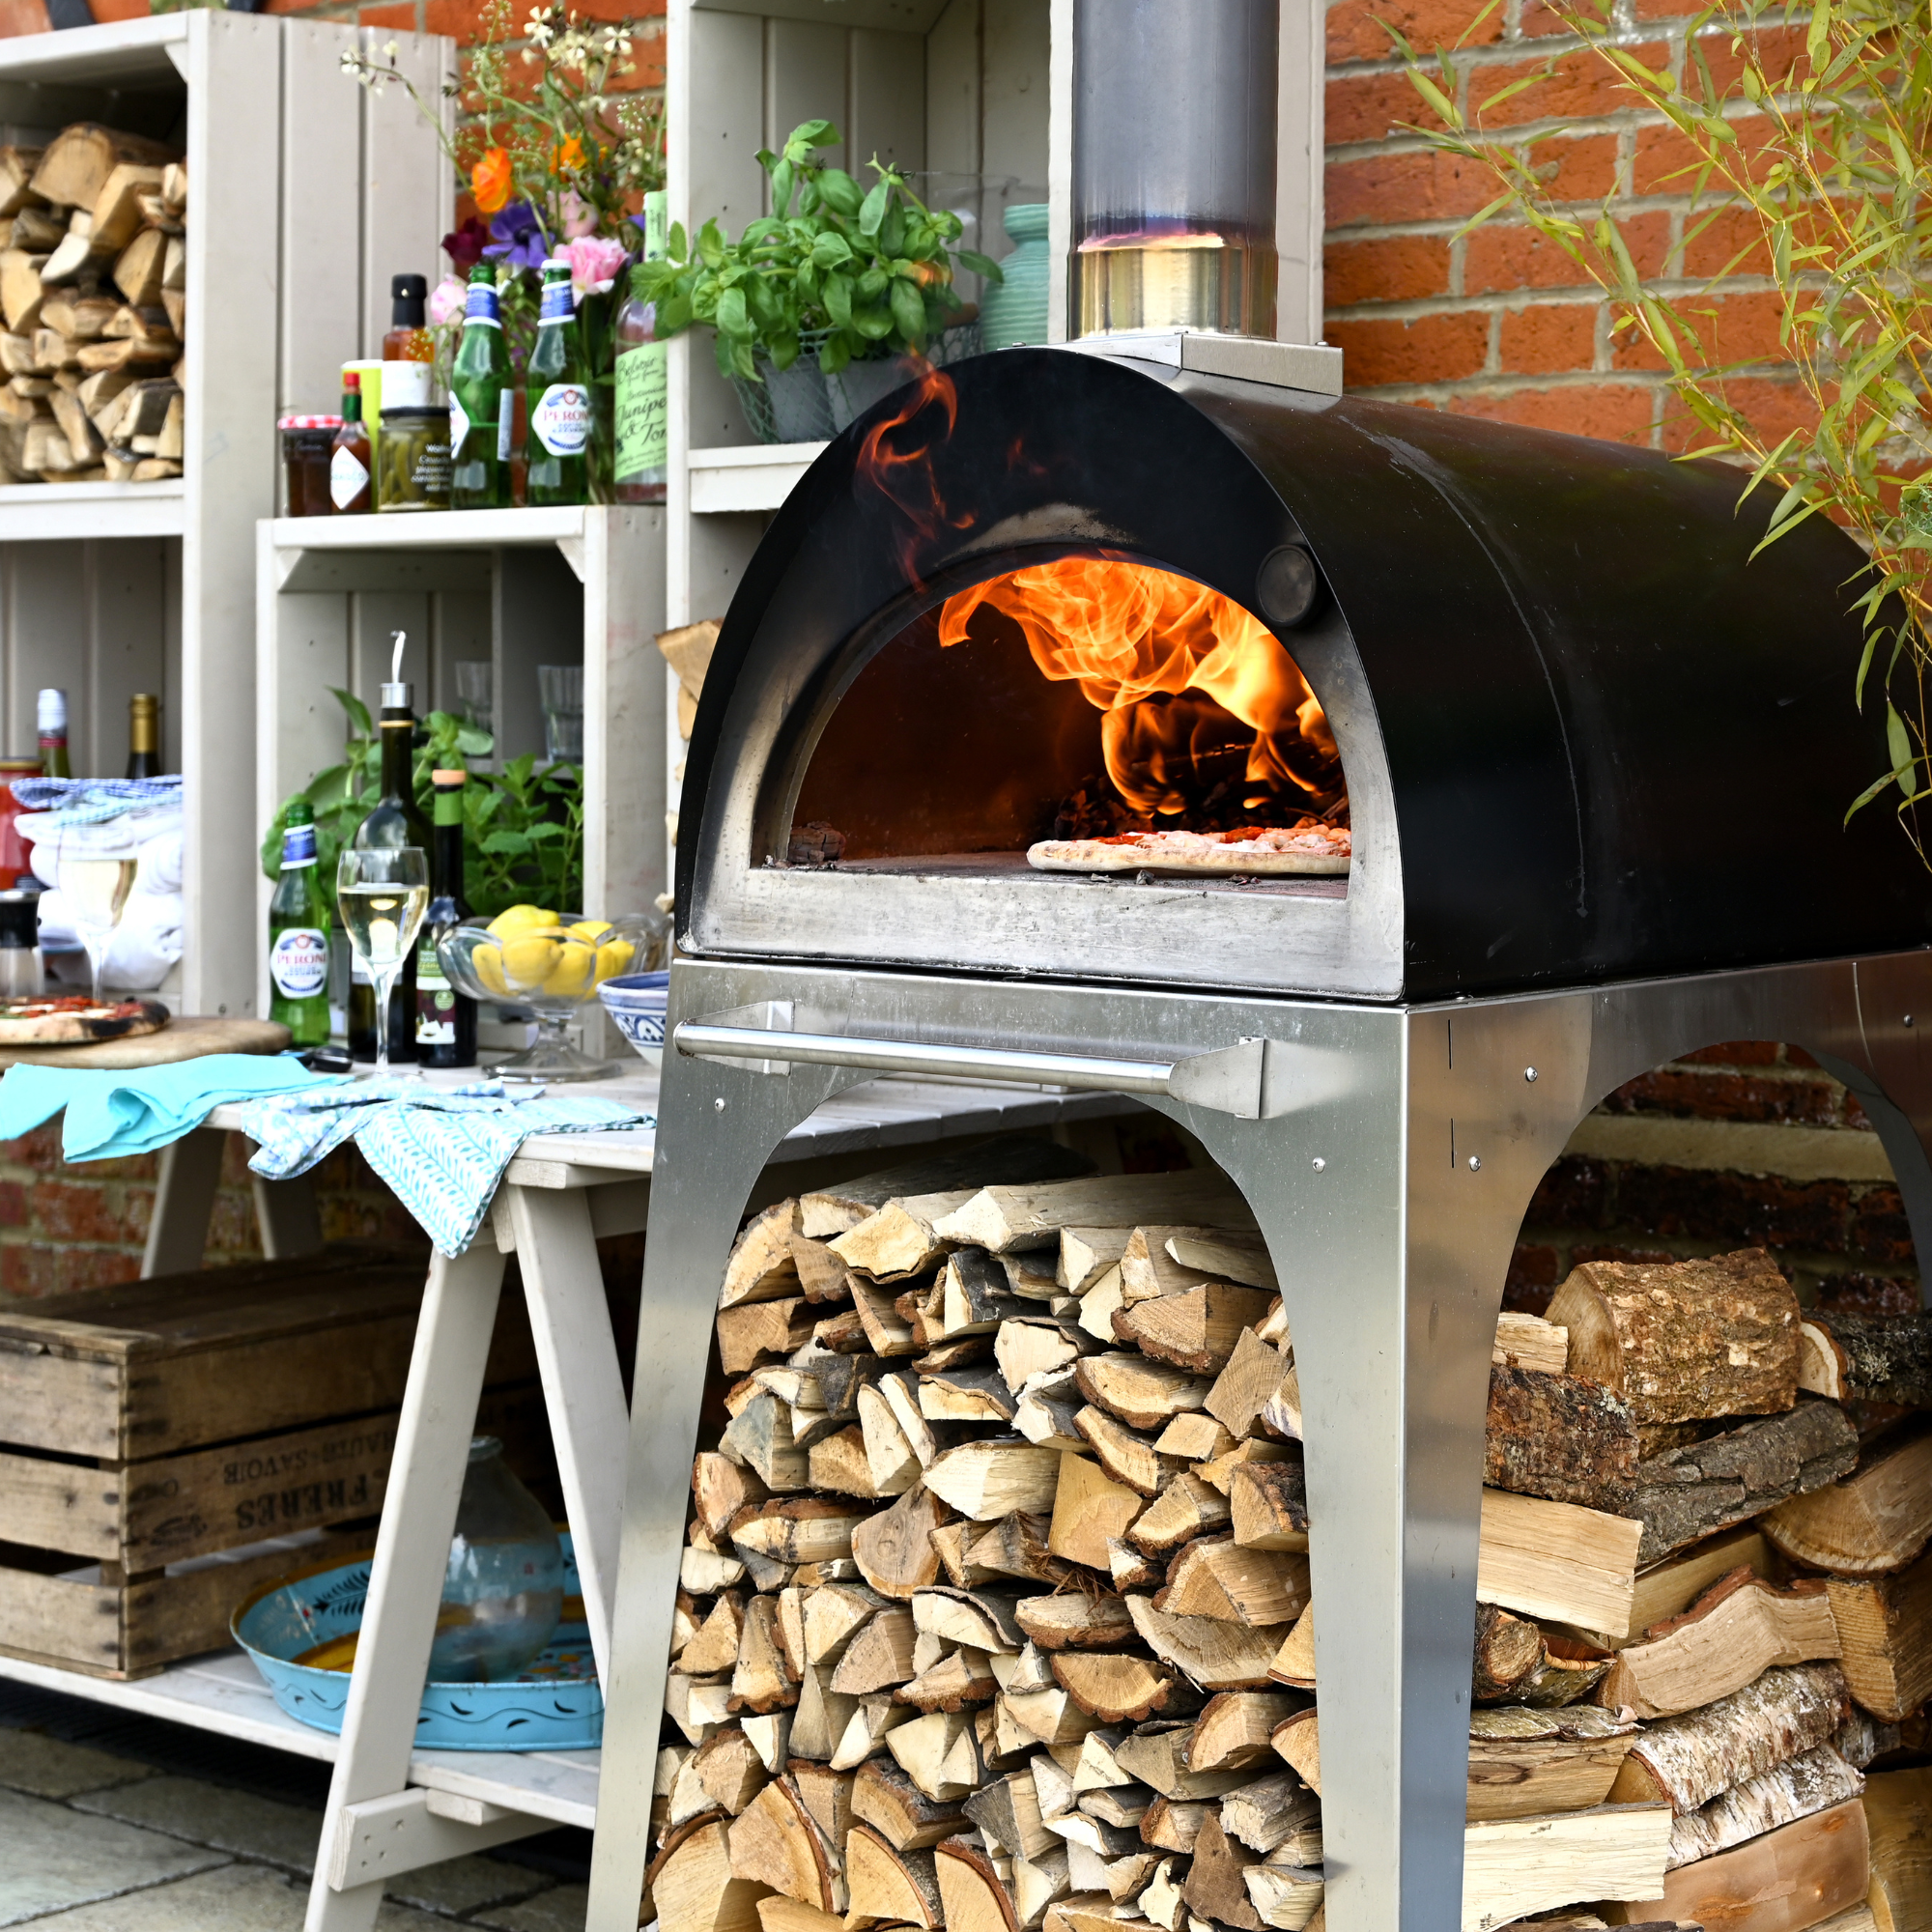 Super Thin Pizza Oven Starter Kit. Medium Pizza Oven Hardwood Logs, Kindling, Natural Firelighters and Matches